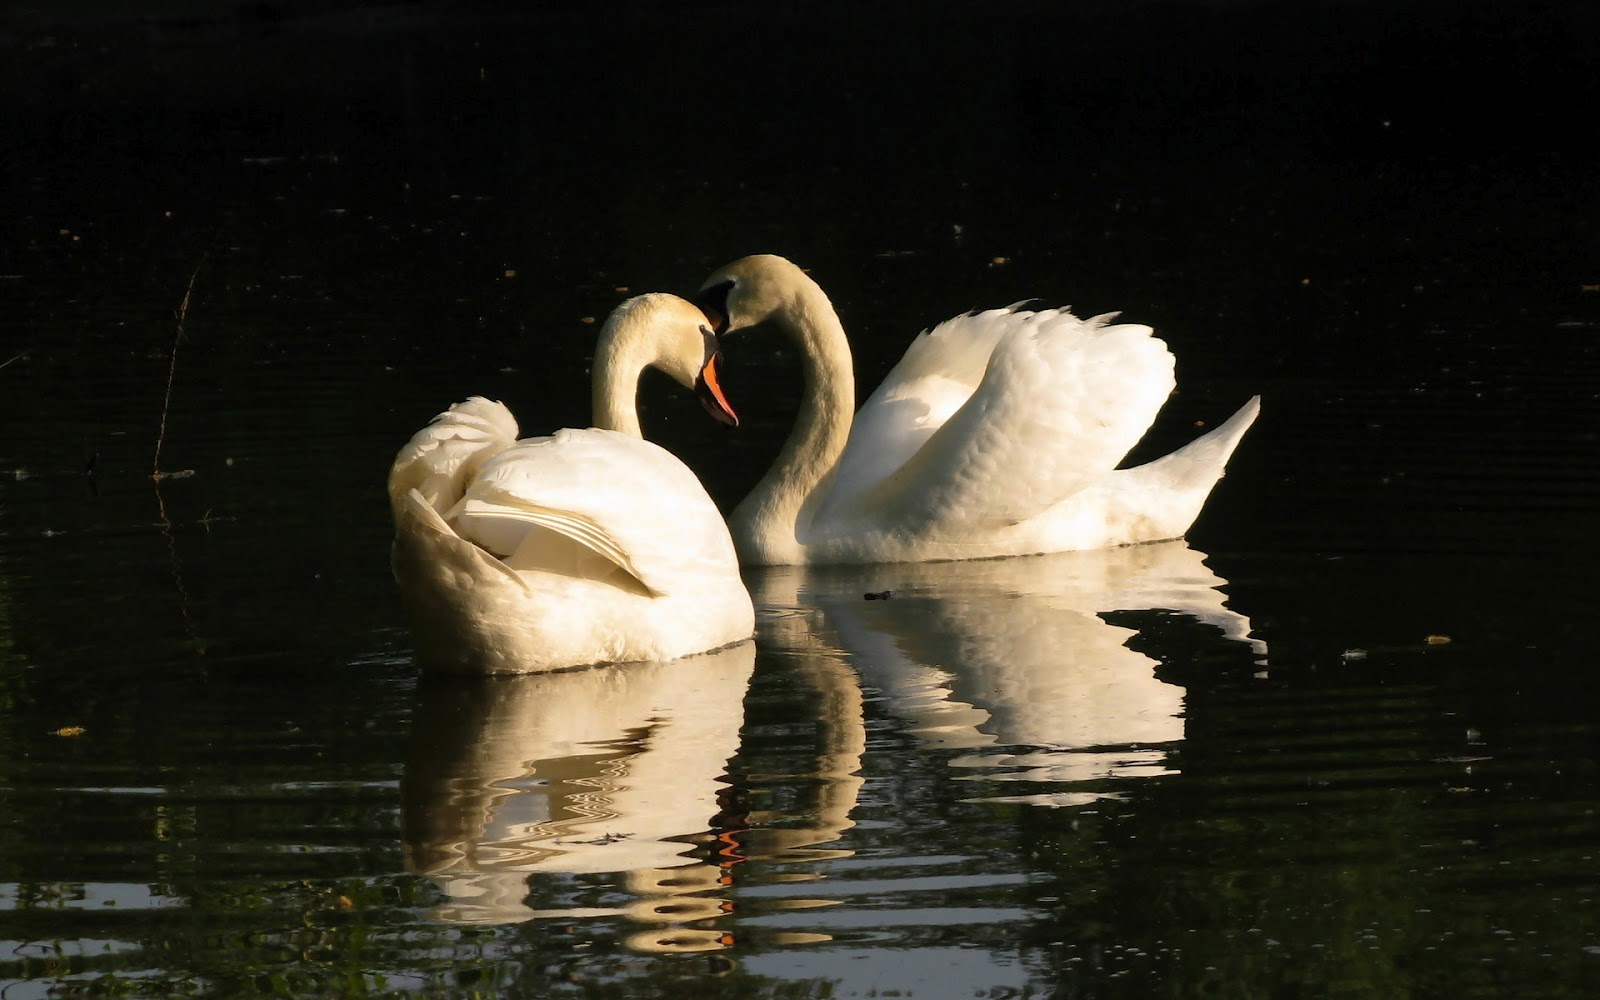 http://2.bp.blogspot.com/-Y4nOJNSA6yc/UDfssijhOJI/AAAAAAAABCM/a33I6JNmguk/s1600/hd-white-swans-wallpaper-with-two-white-swans-cuddling-in-the-water-swans-wallpapers-backgrounds-pictures-paos.jpg